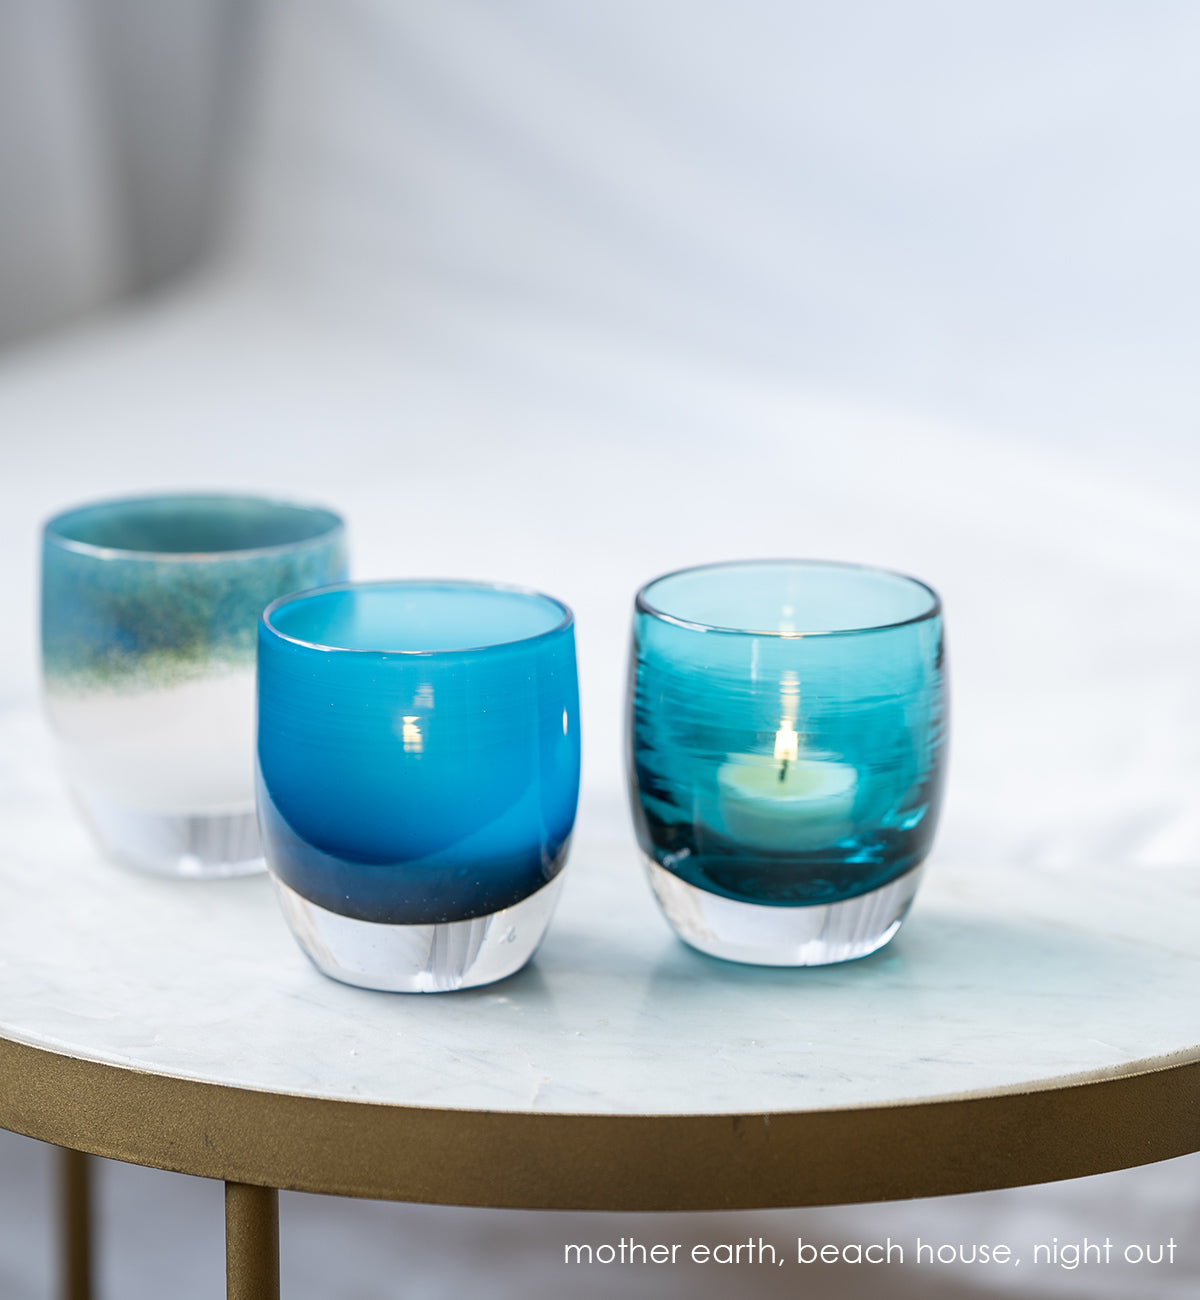 night out dark aqua blue transparent, hand-blown glass votive candle holder. paired with mother earth metallic blue green on white, and beach house blue gradient